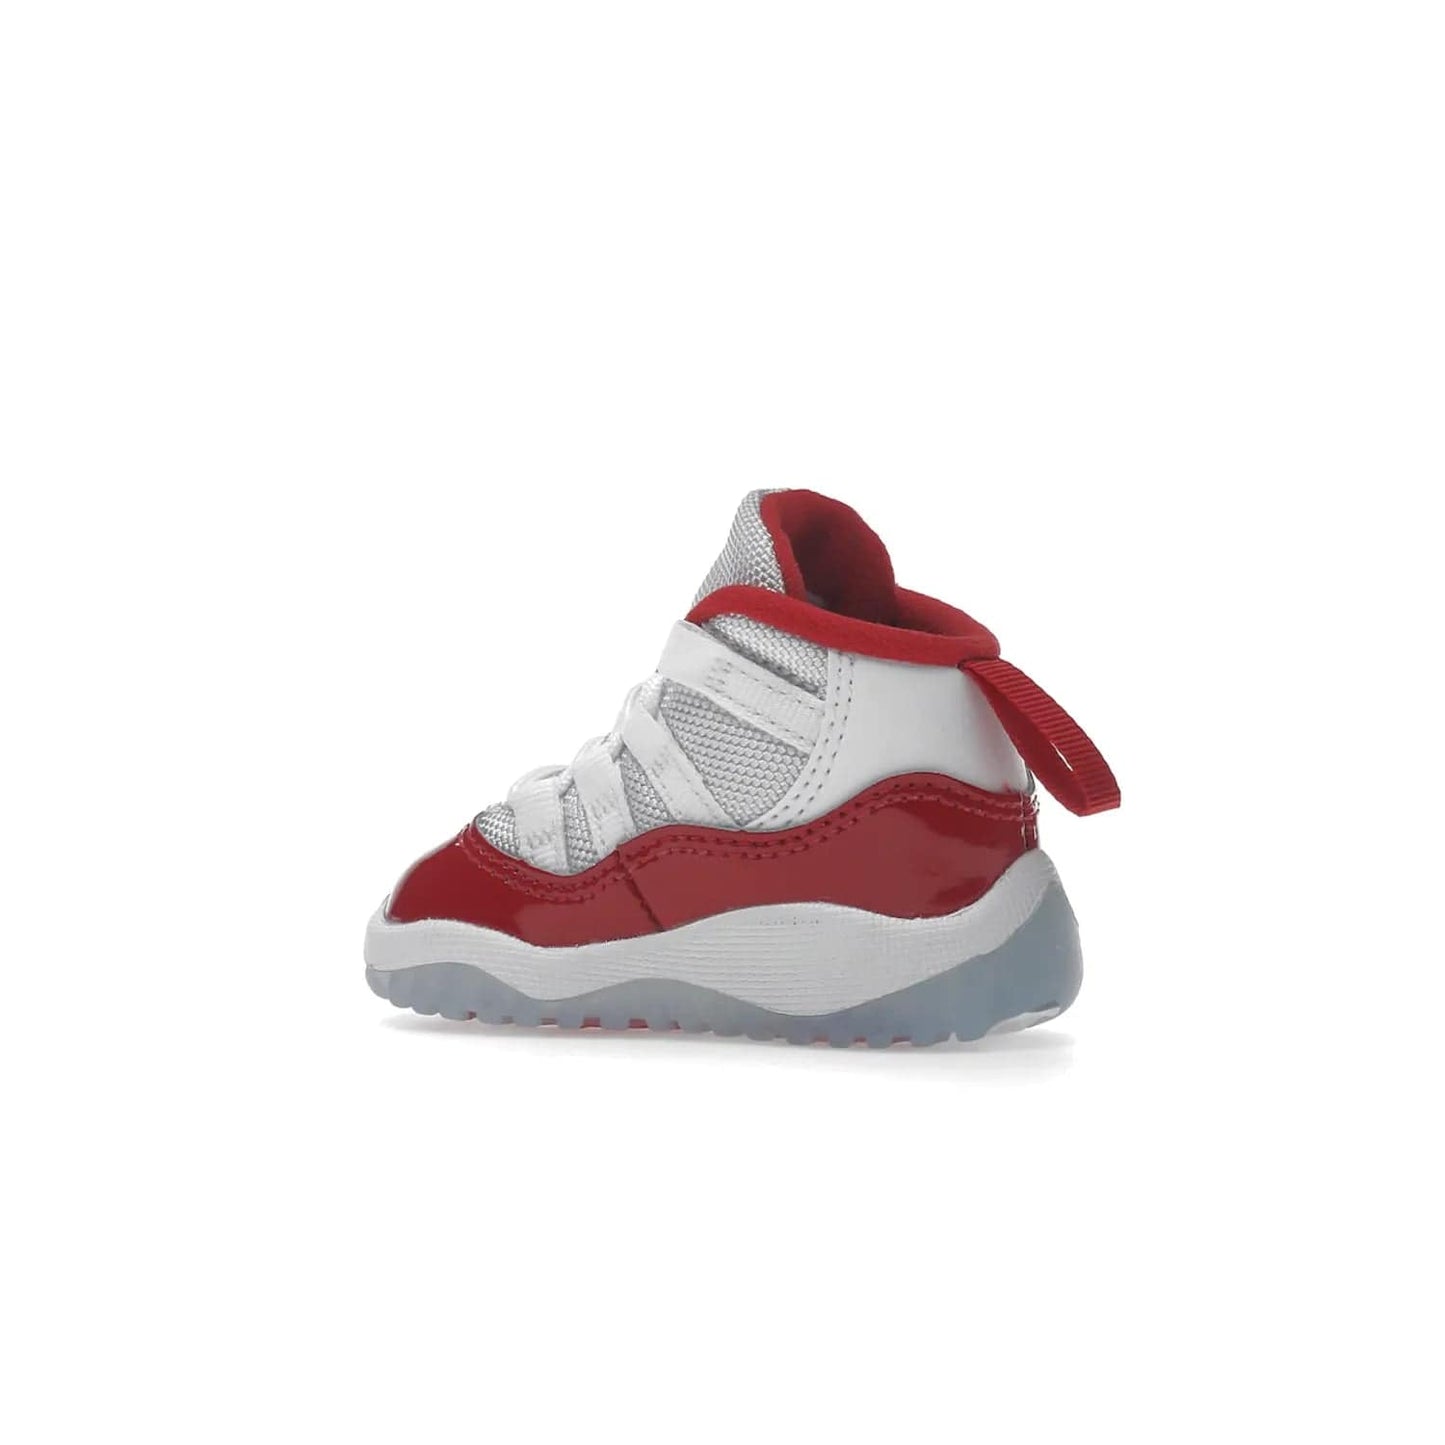 Jordan 11 Retro Cherry (2022) (TD) - Image 22 - Only at www.BallersClubKickz.com - Timeless classic. Air Jordan 11 Retro Cherry 2022 TD combines mesh, leather & suede for a unique look. White upper with varsity red suede. Jumpman logo on collar & tongue. Available Dec 10th, priced at $80.